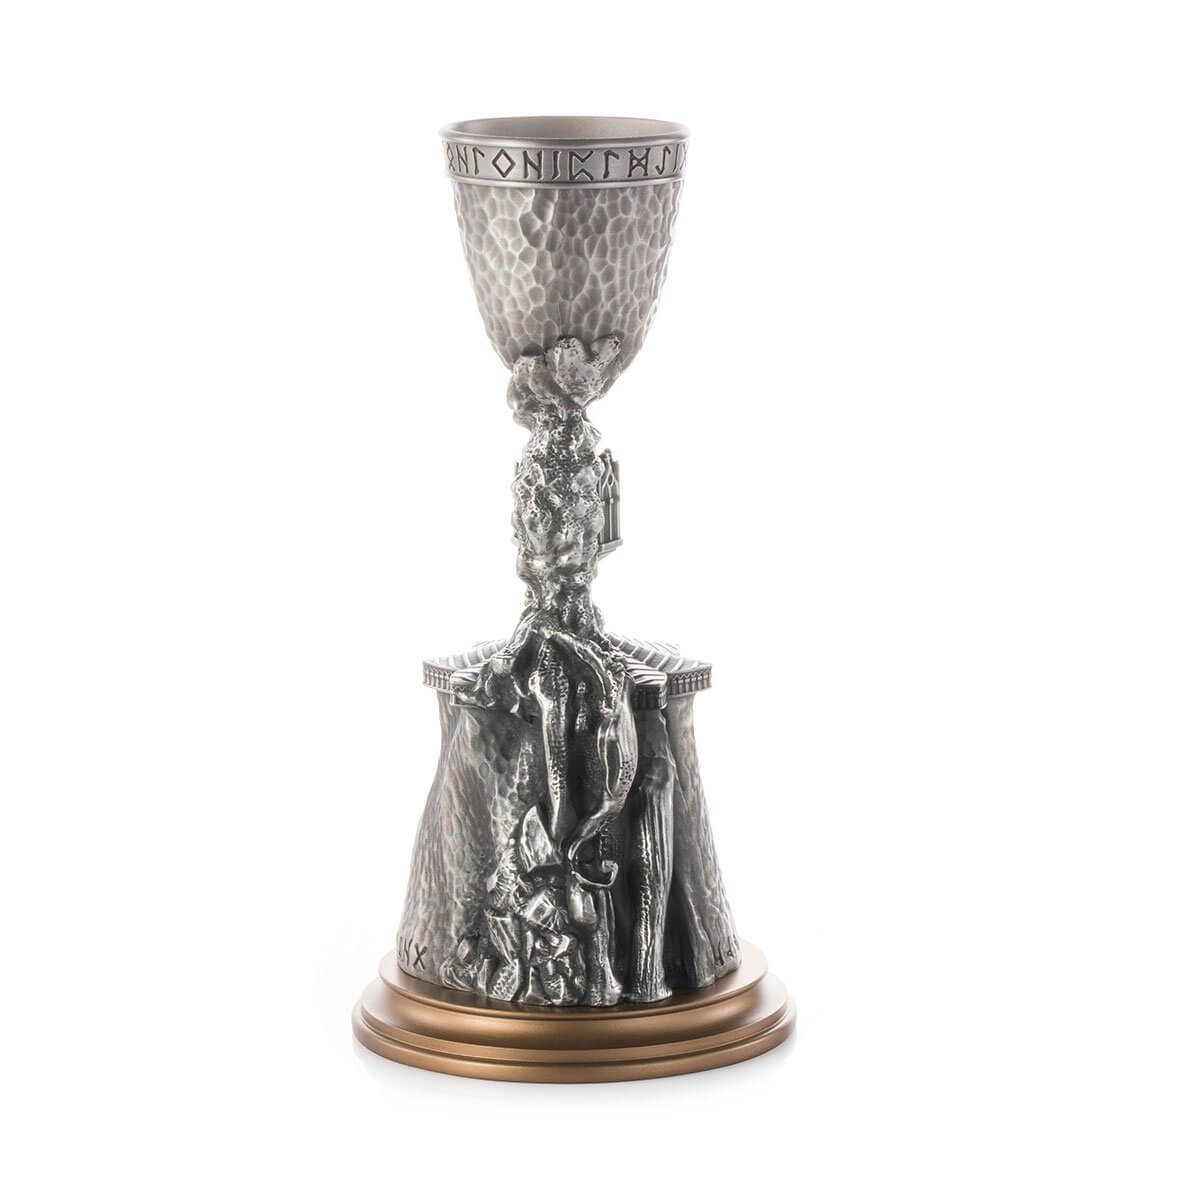 Goblet of Fire Limited Edition - Harry Potter Collectible Gift